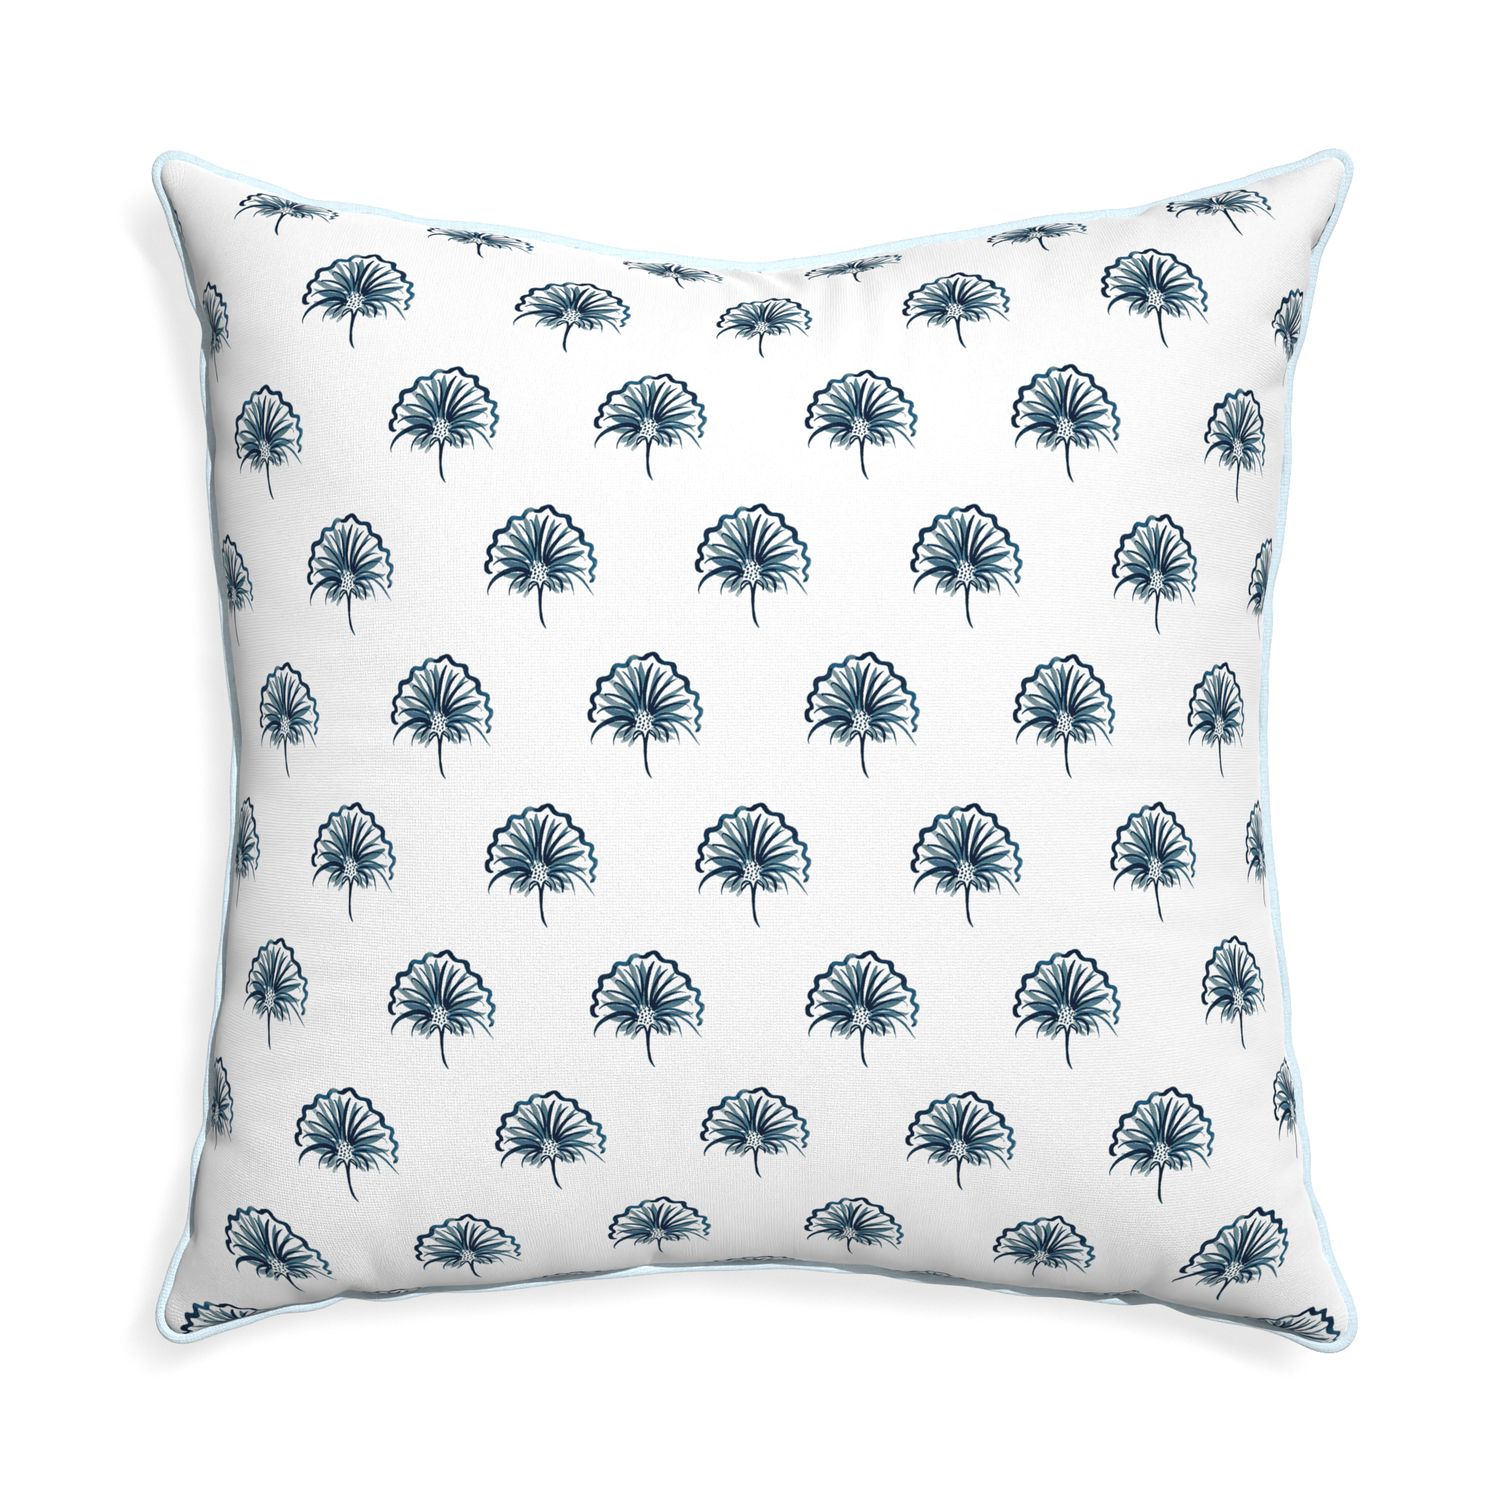 Euro-sham penelope midnight custom floral navypillow with powder piping on white background